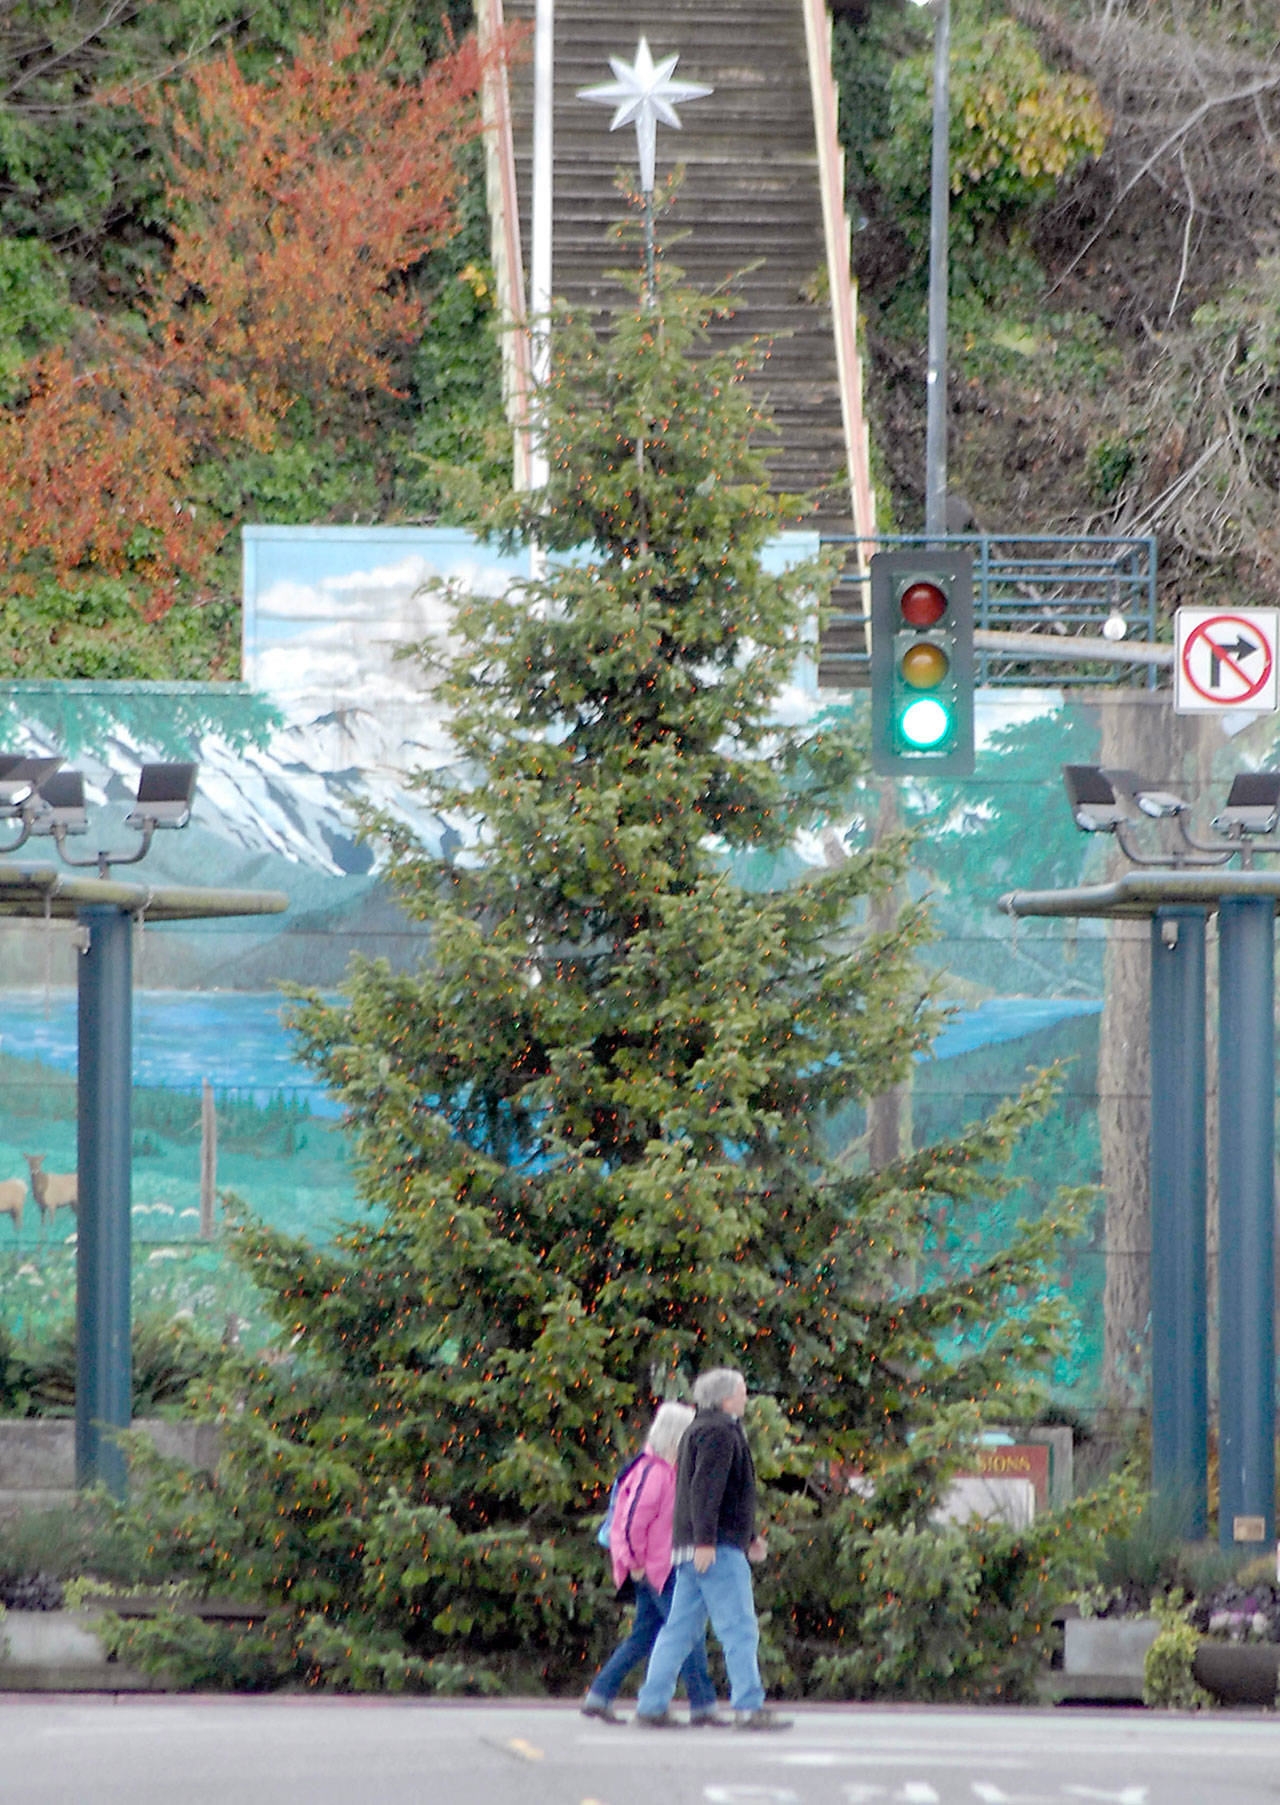 Formal ceremonies to officially light the downtown Port Angeles Christmas tree, shown in this 2019 file photo, could be scrapped in 2020 due to the threat of COVID-19. (Keith Thorpe/Peninsula Daily News file)